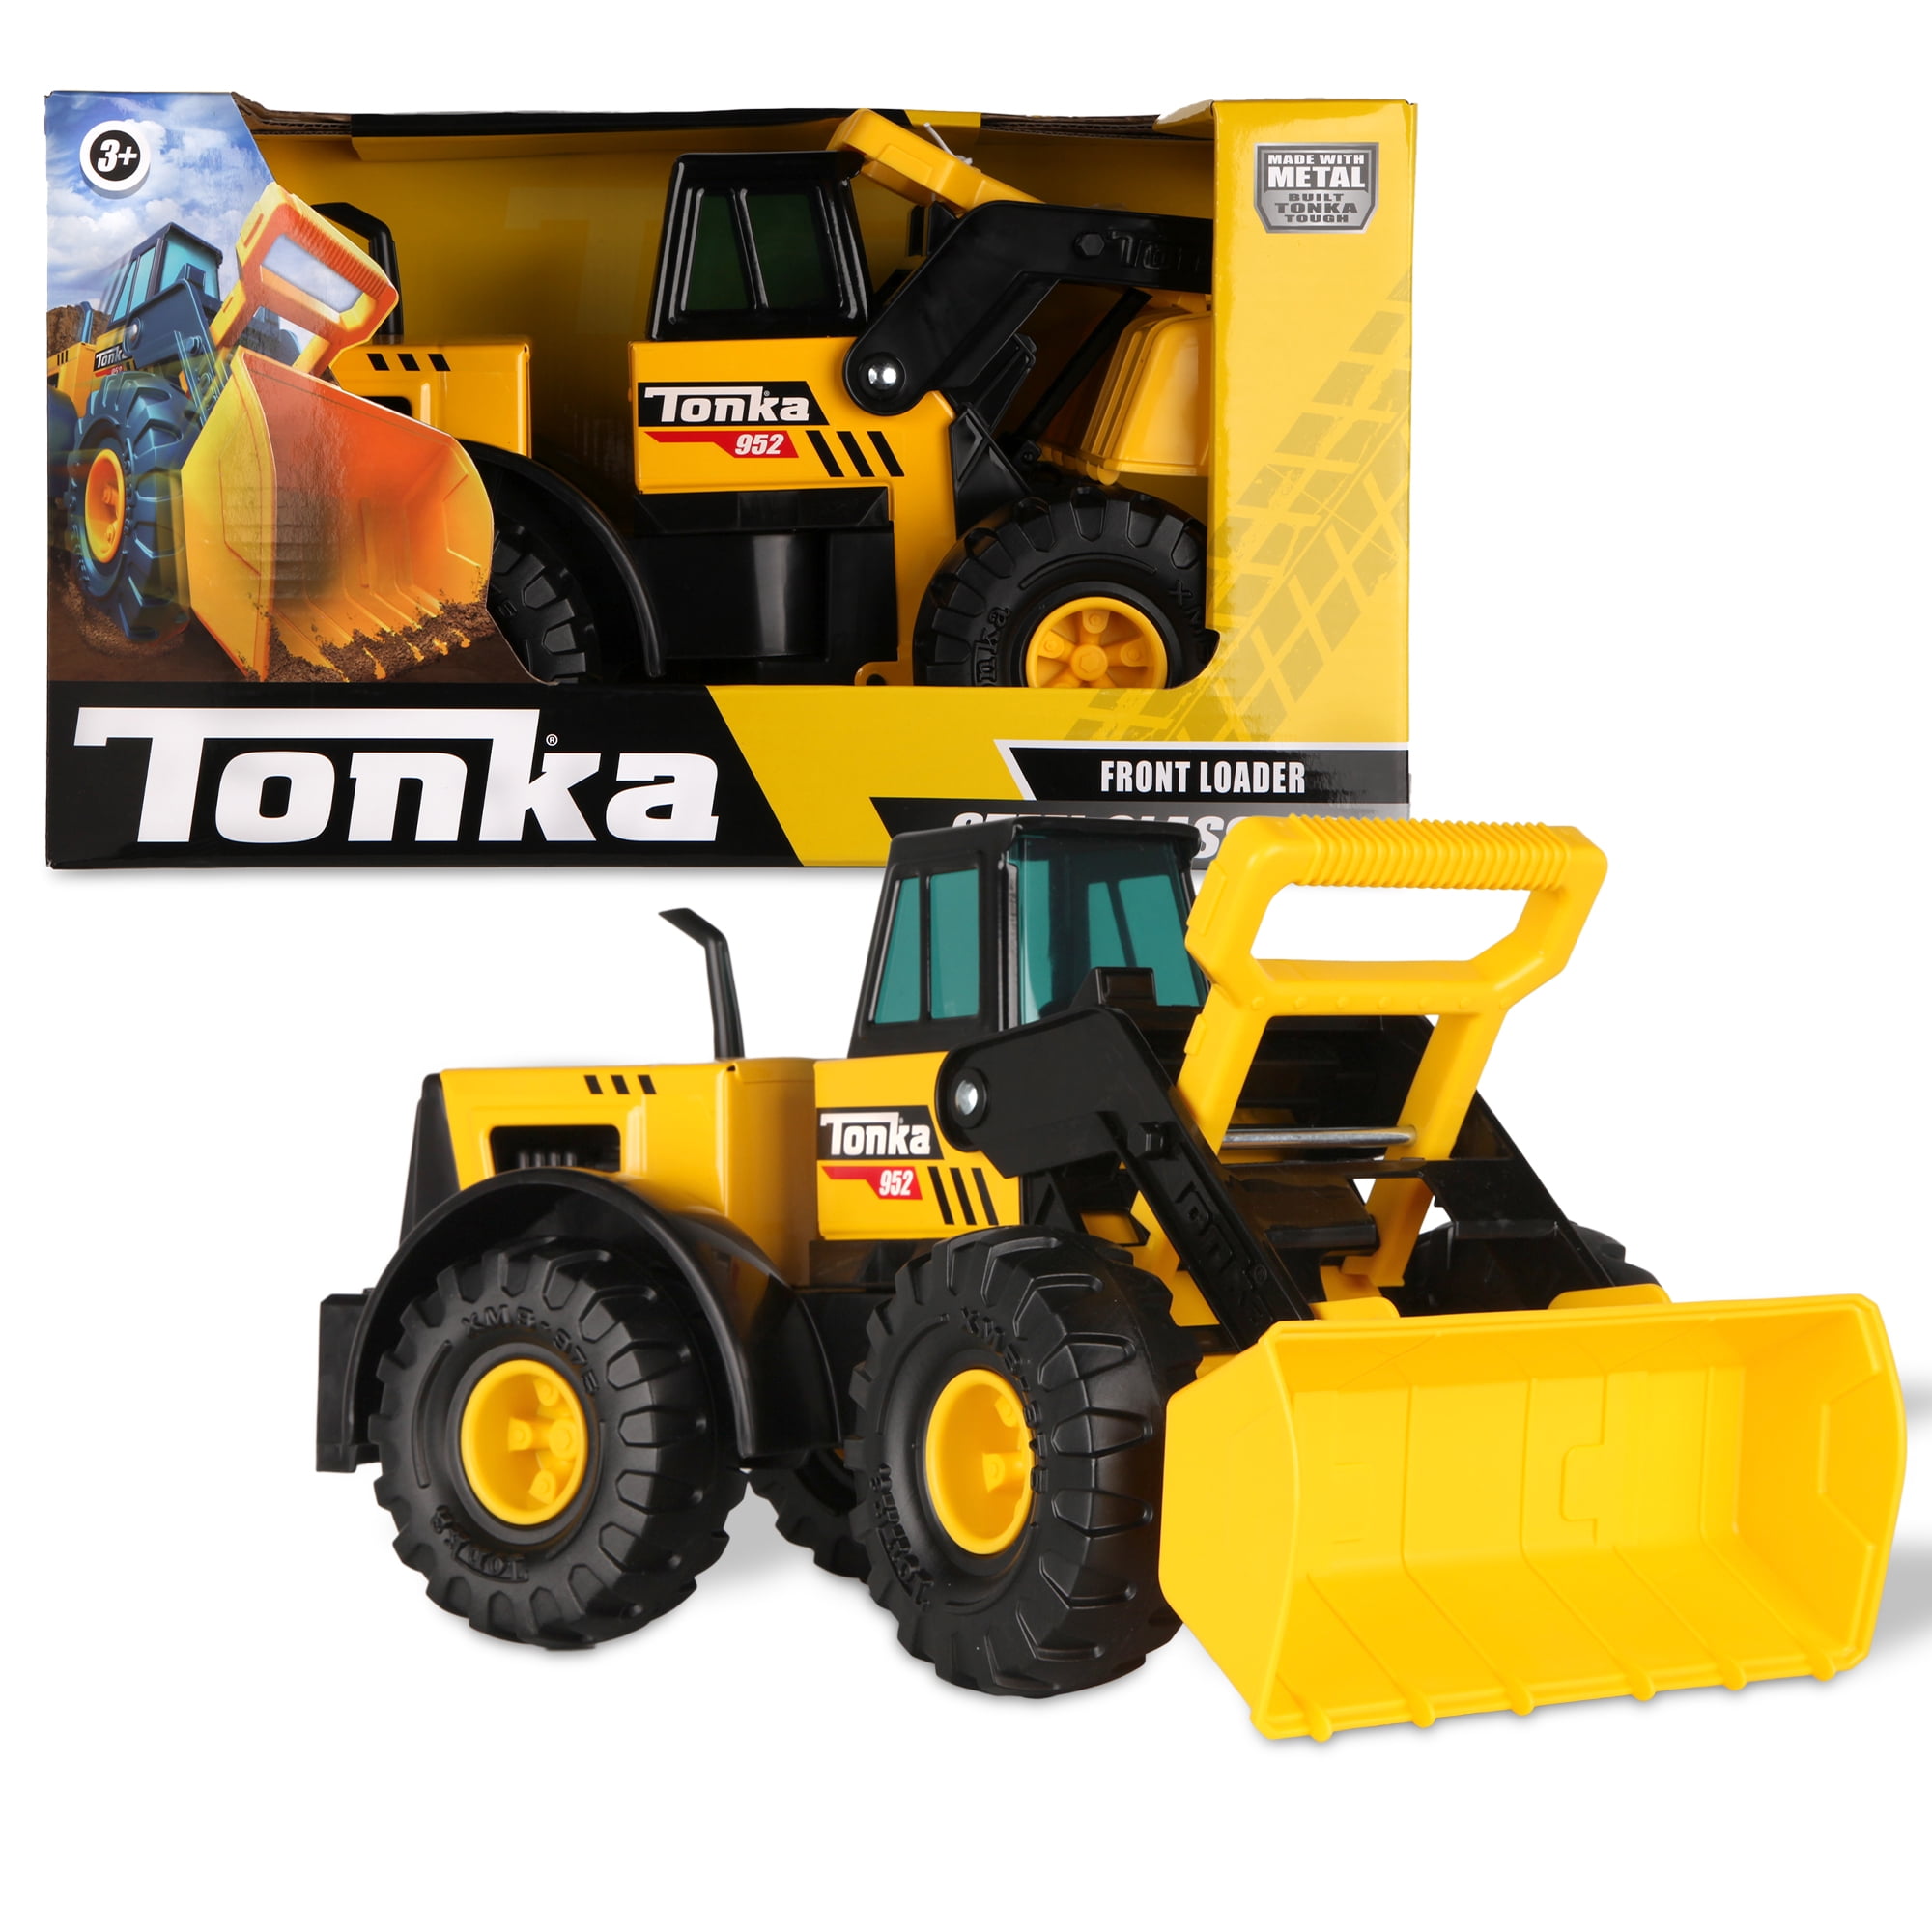 MIGHTY Tonka Classic Steel Front Loader Toughest Toy to Transport Dirt Rocks 